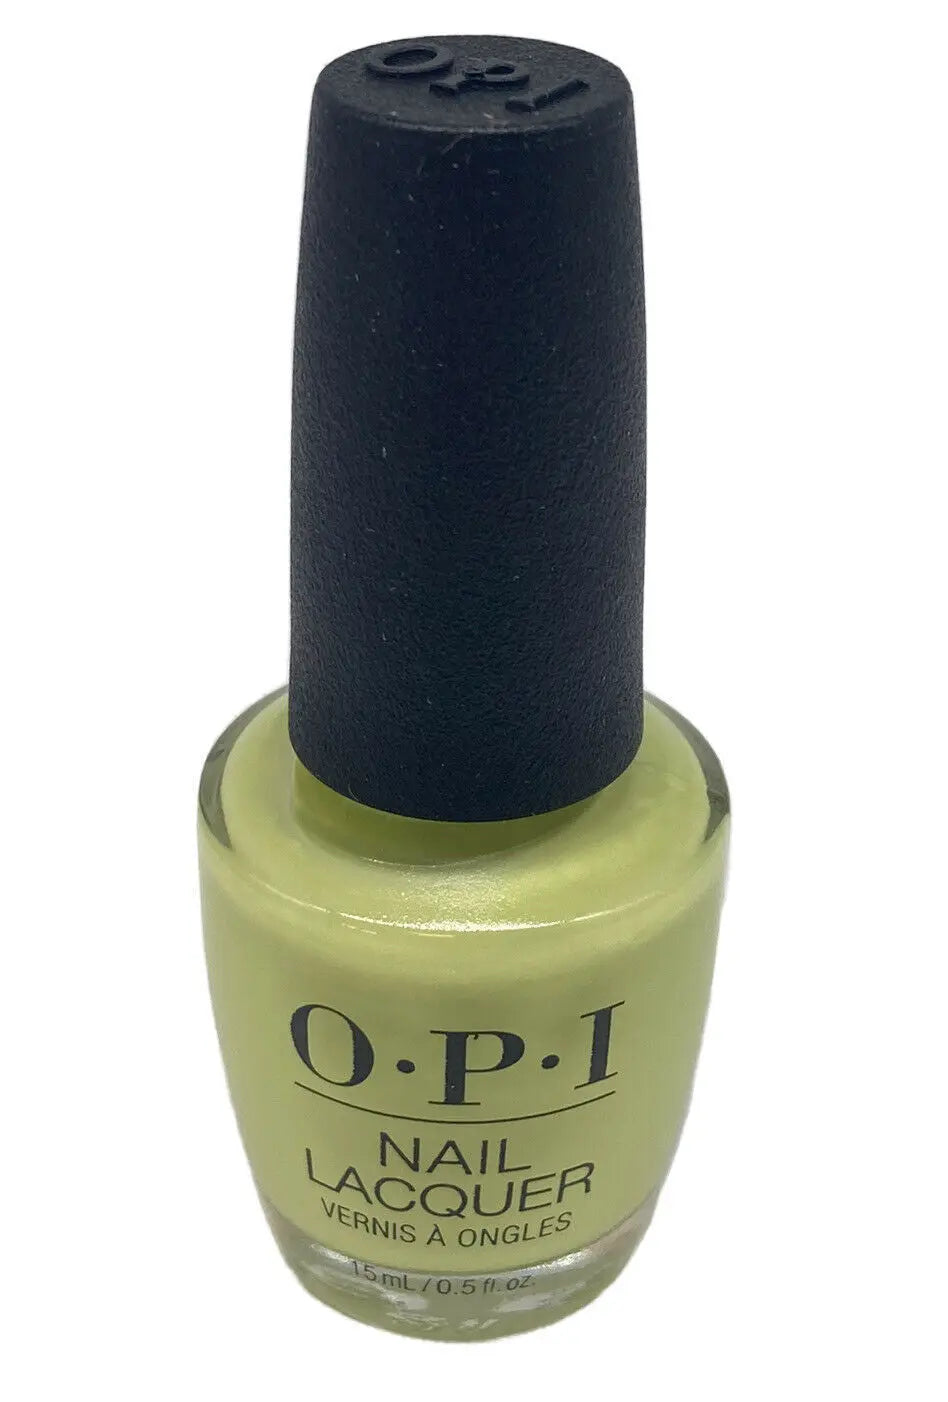 OPI NAIL LACQUER PUMP UP THE VOLUME 15ml